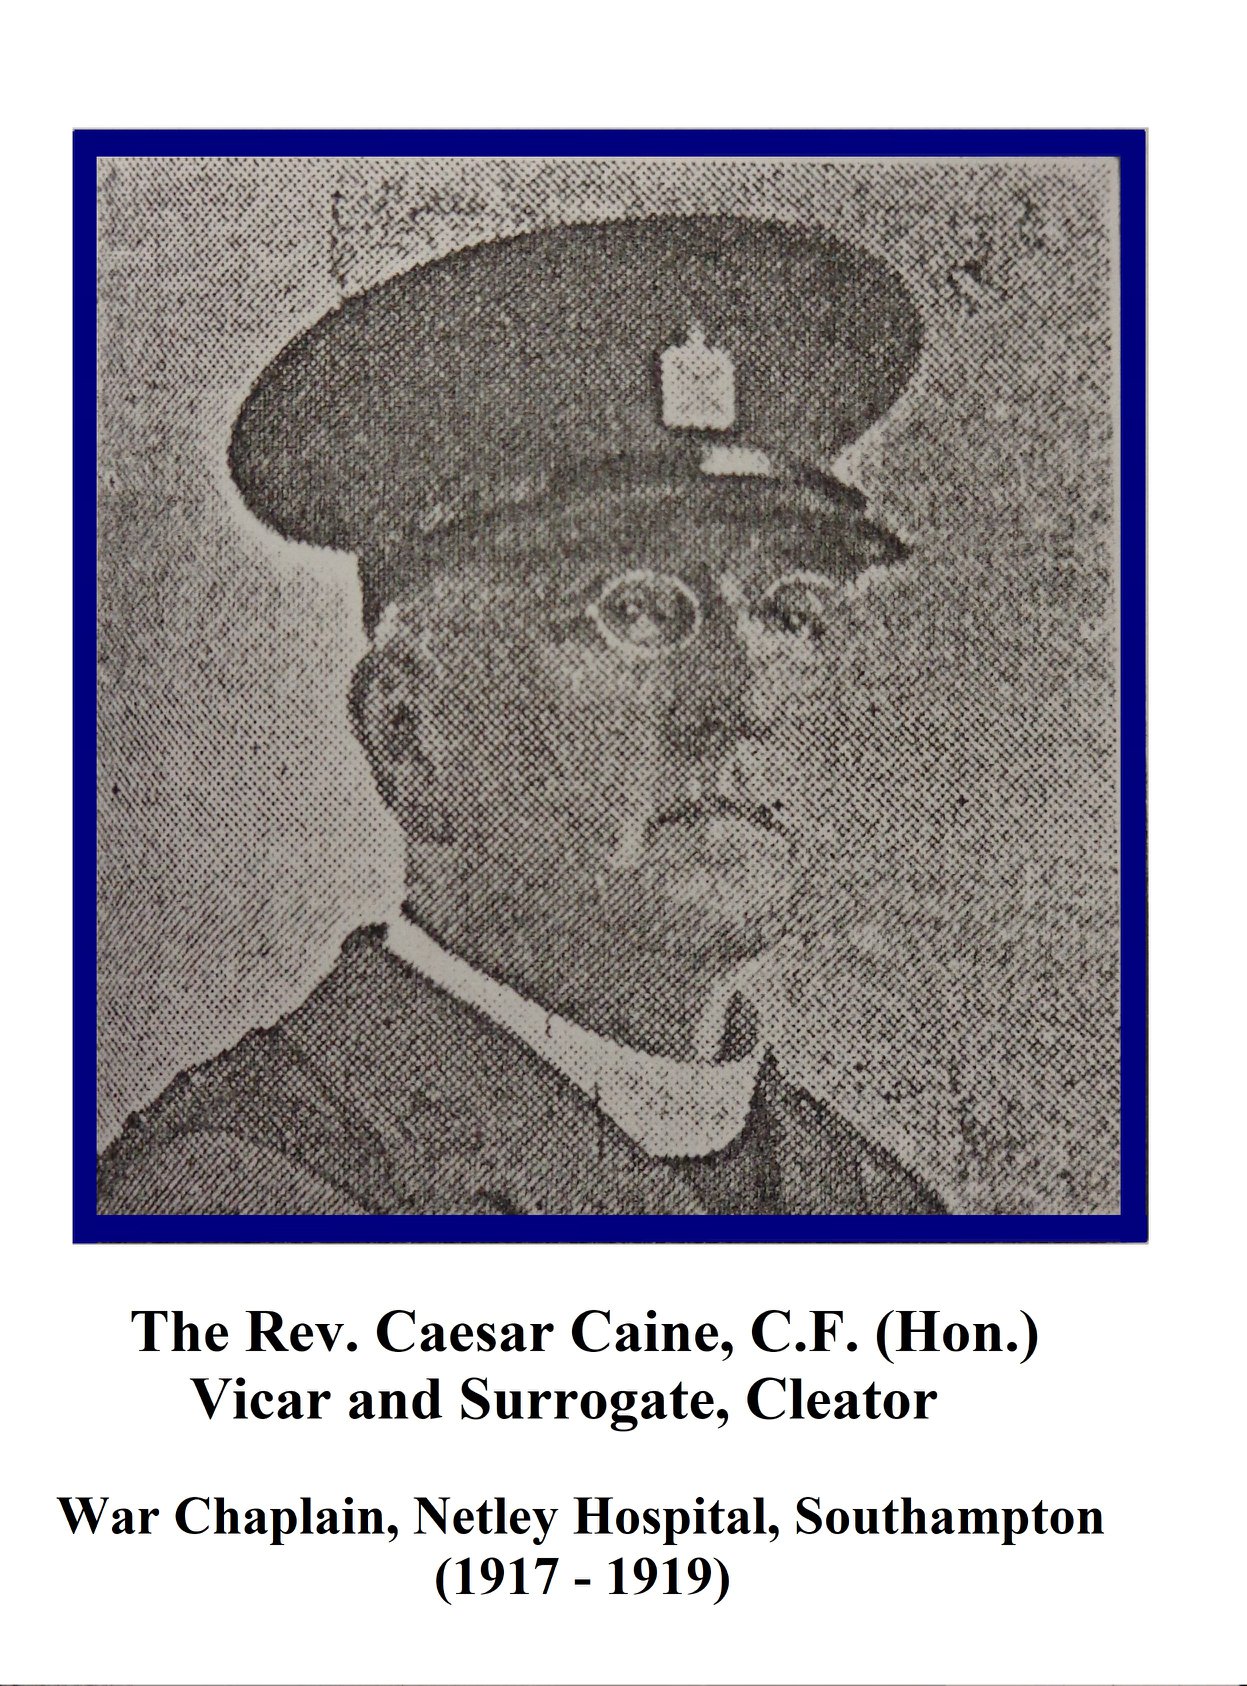 The Clergy who served with the Troops Pt 2 image